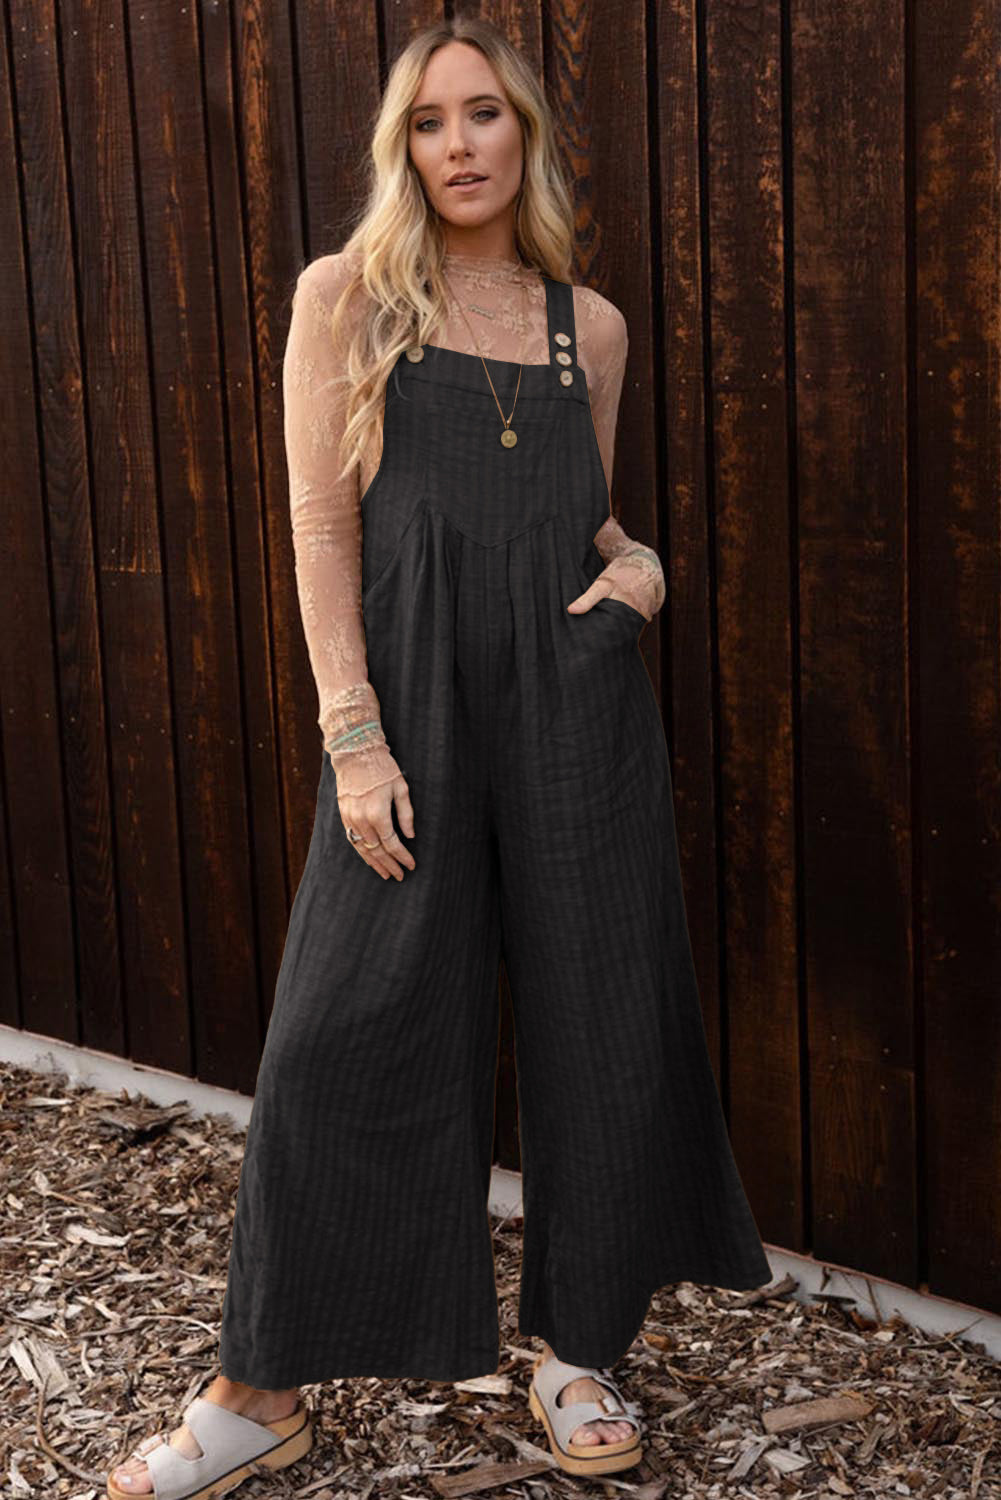 Black Striped Pleated Wide Leg Pocketed Jumpsuit